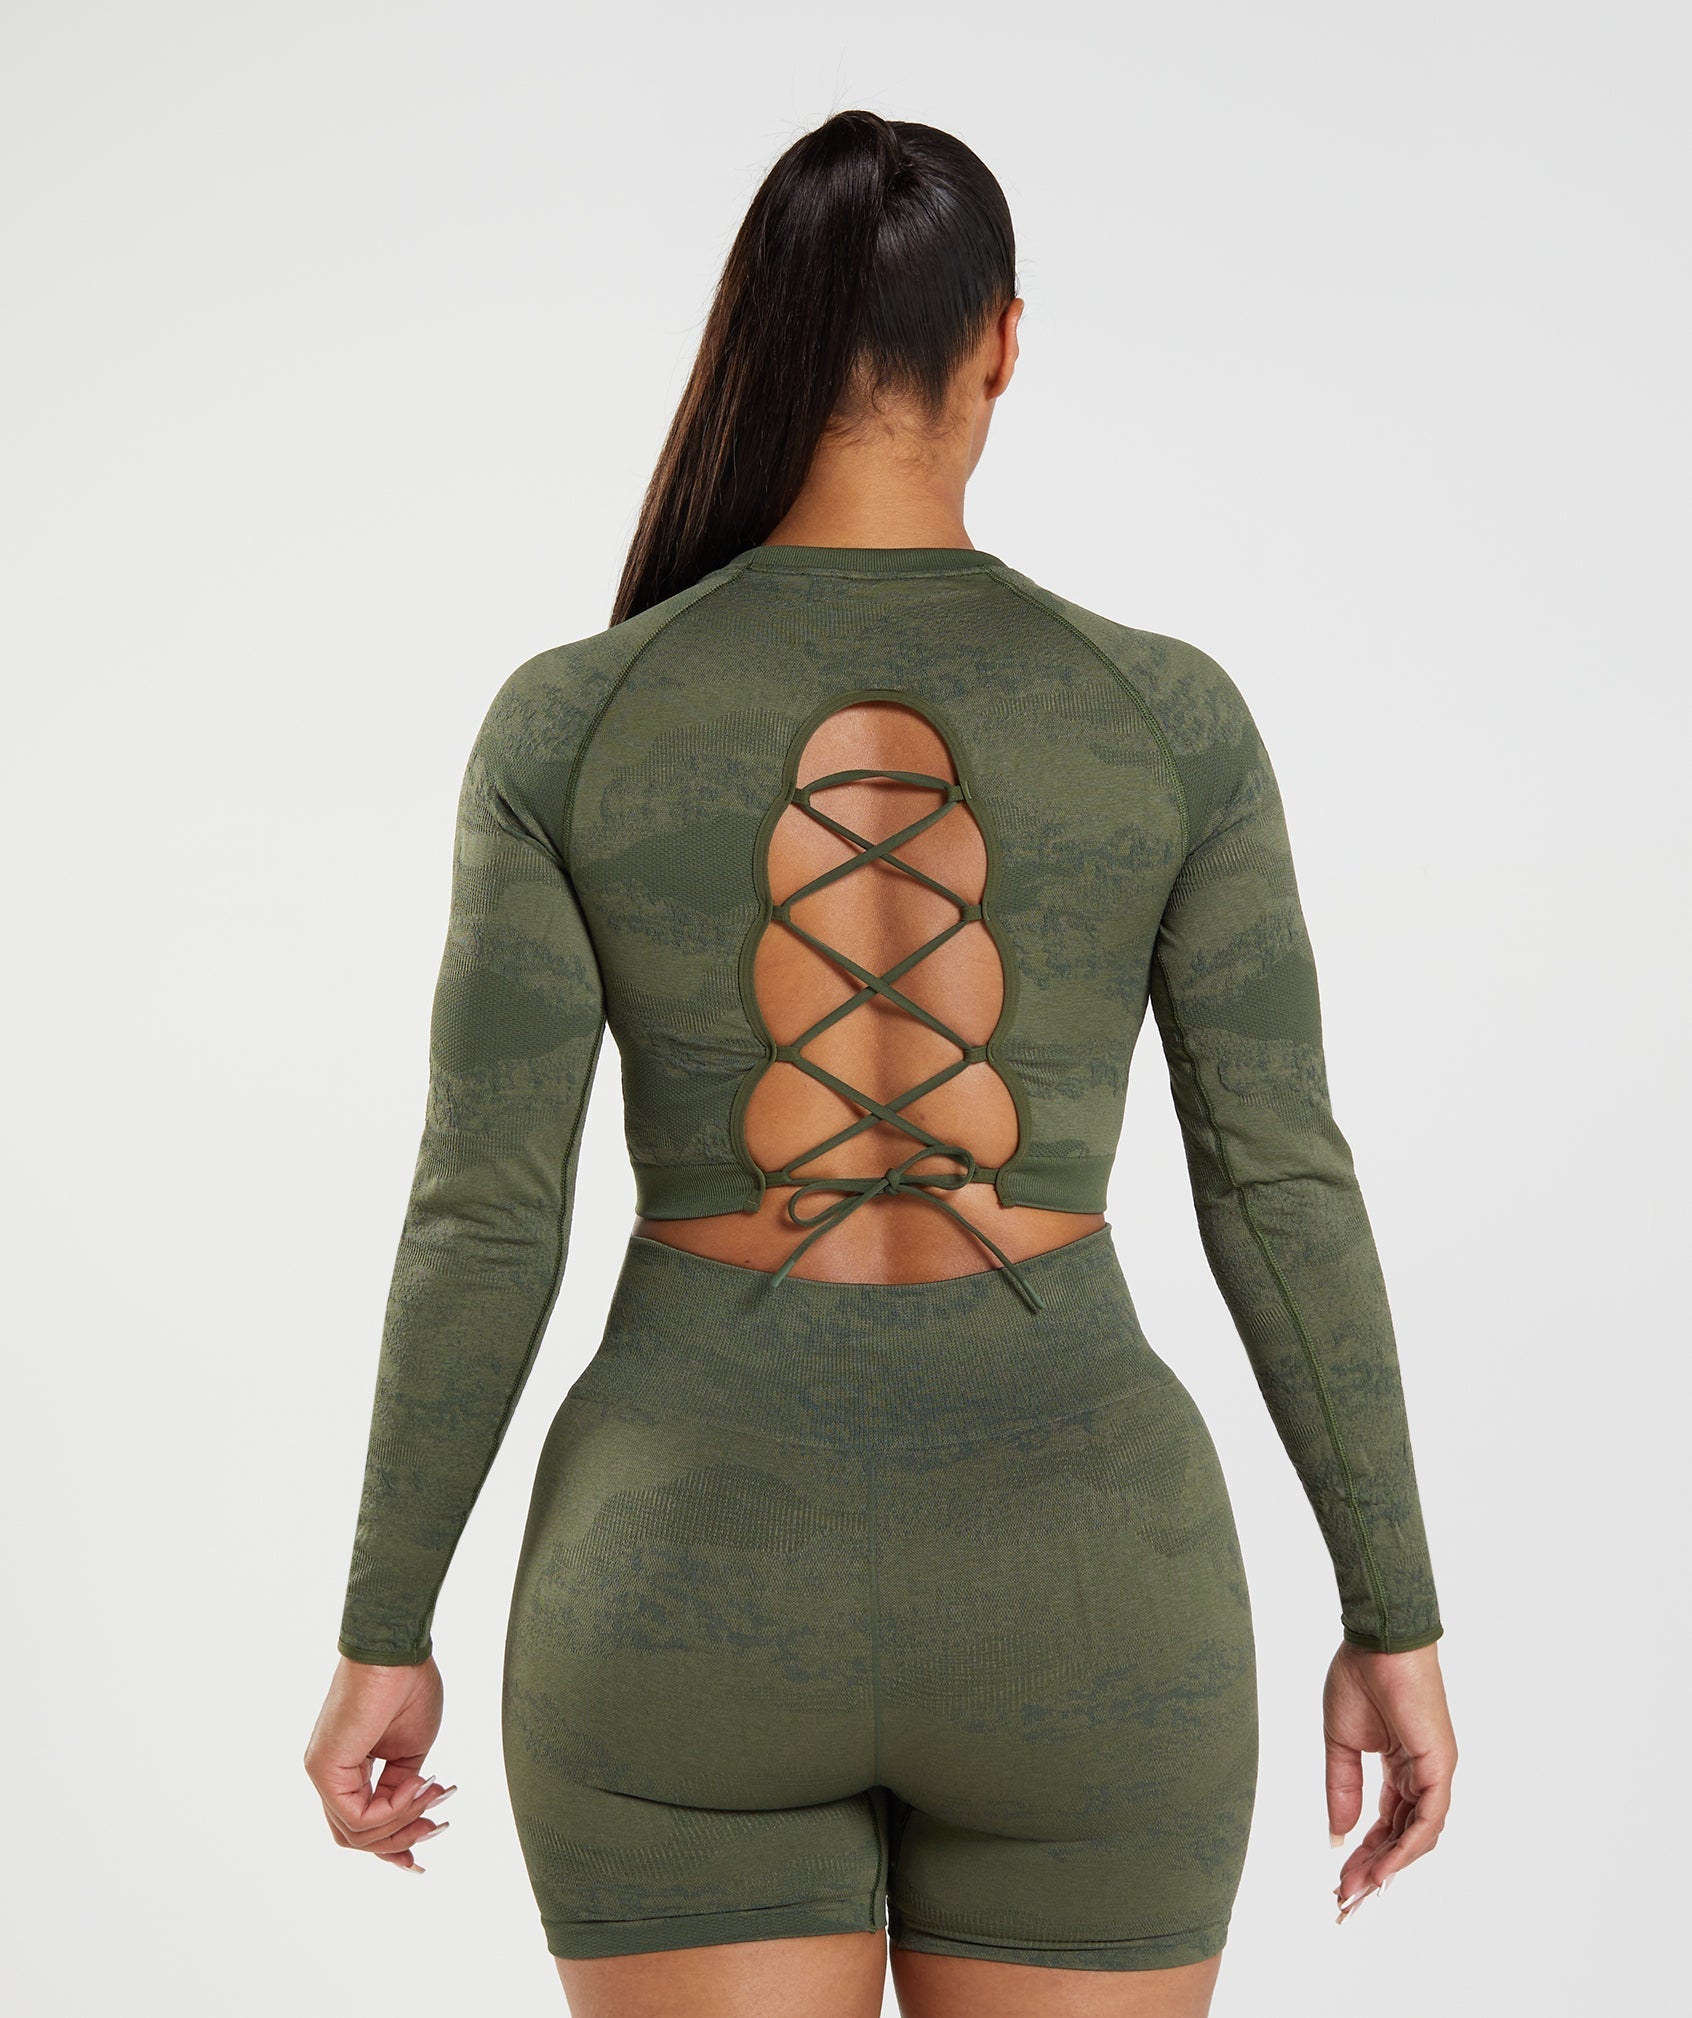 Adapt Camo Seamless Lace Up Back Top, Women's Fashion, Activewear